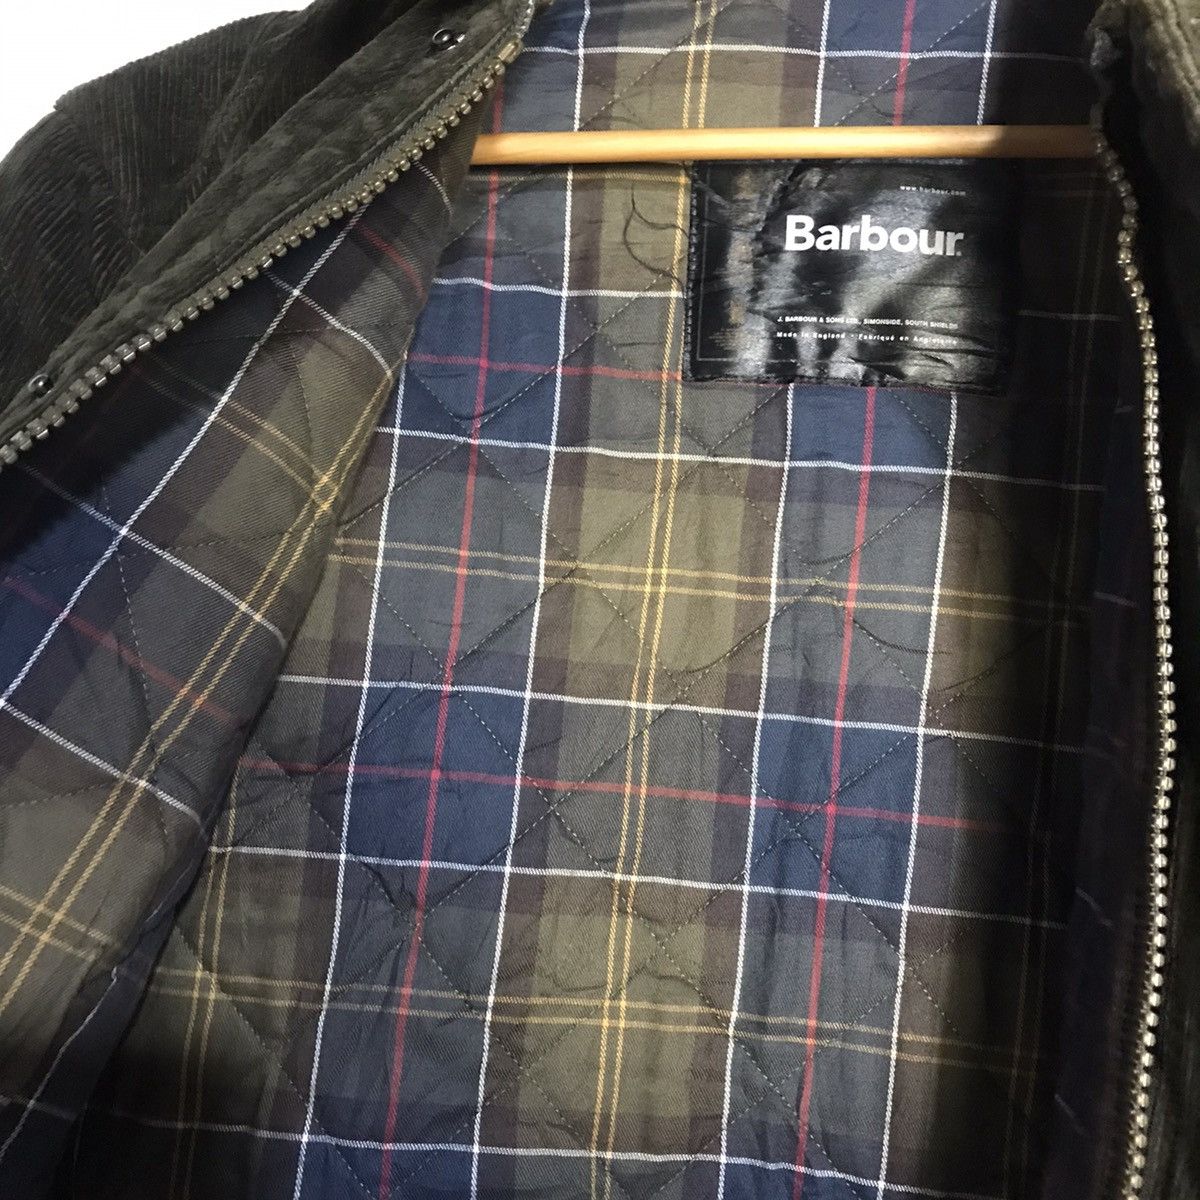 Barbour fine corduroy quilted jacket - 10